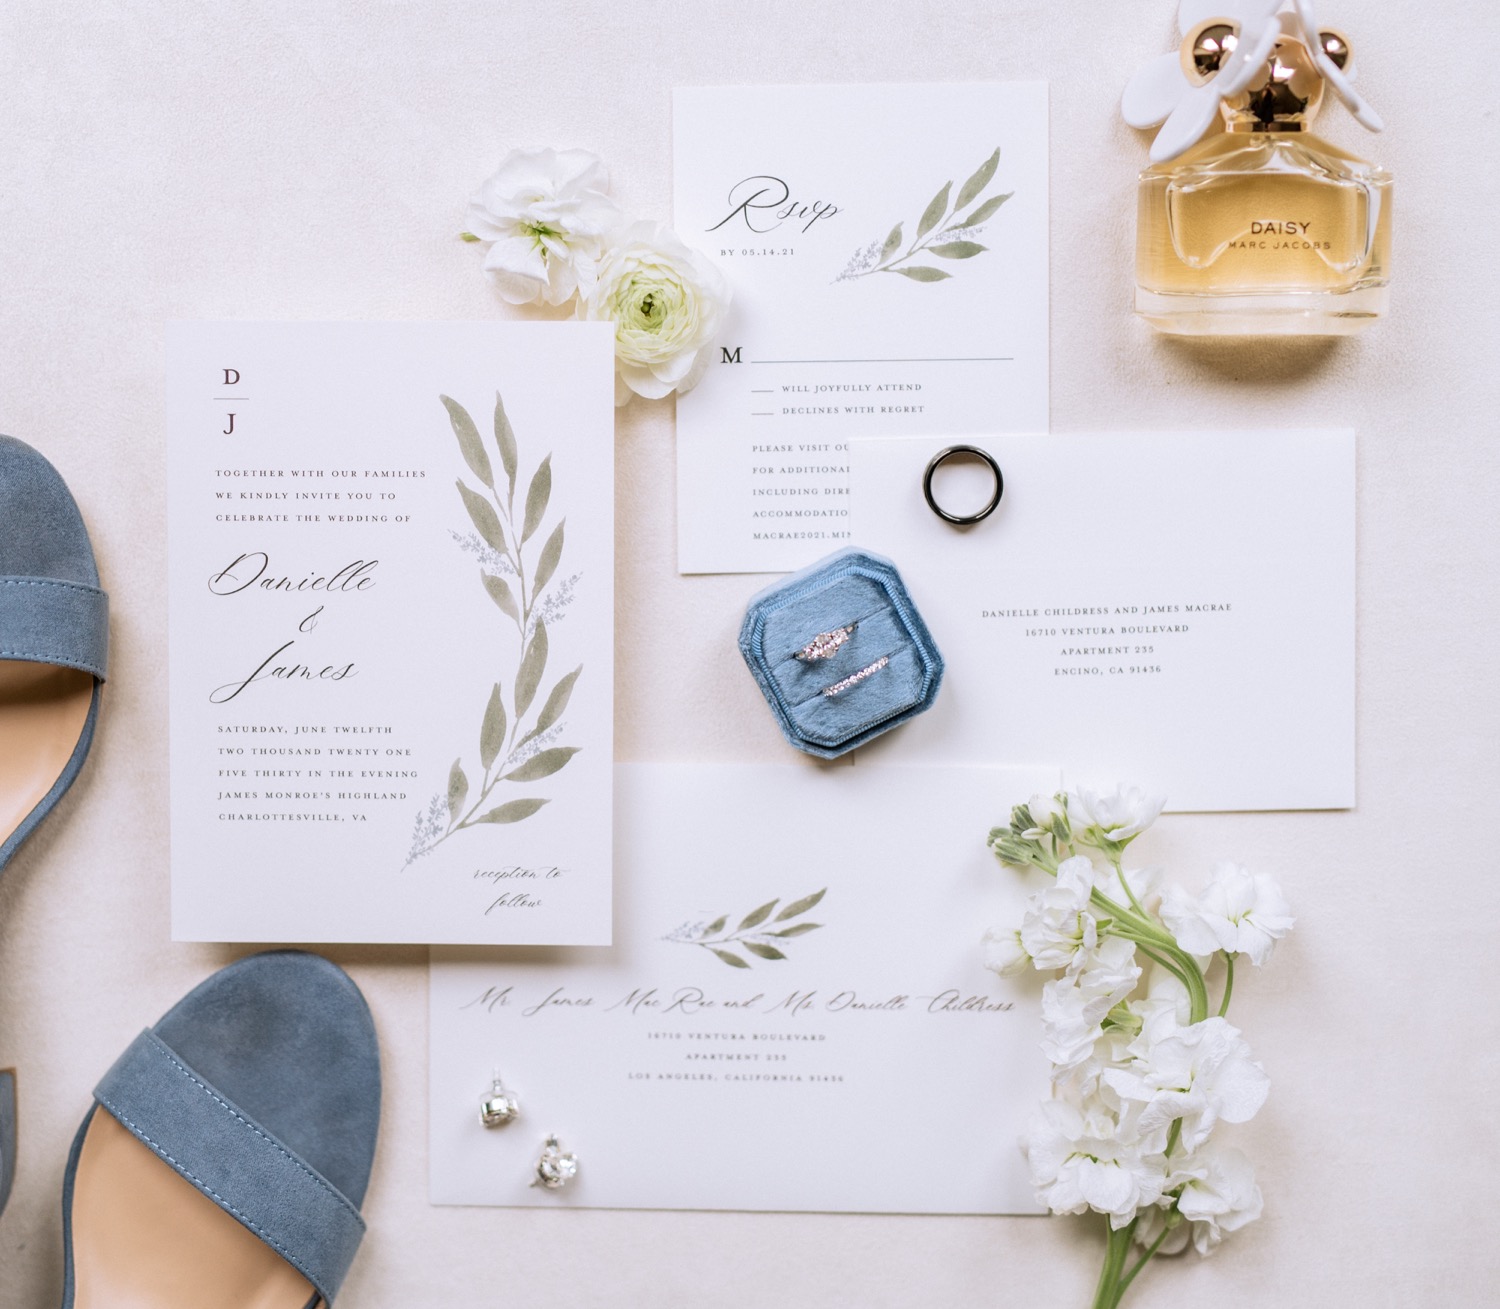 Wedding flowers, shoes, rings, and invitation